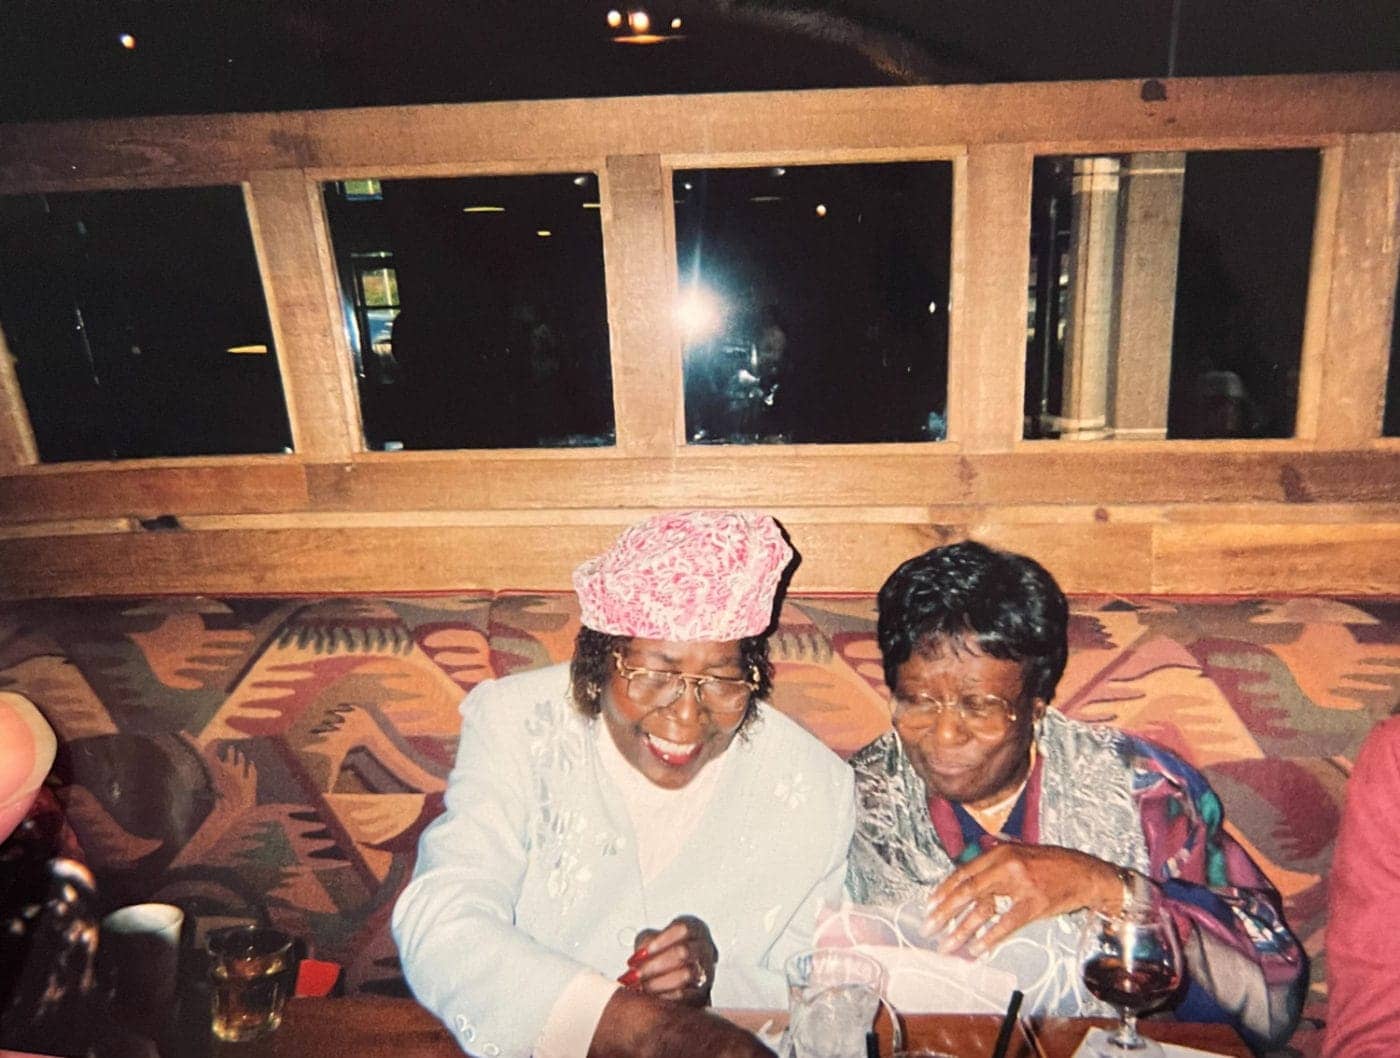 Izola-Frierson-in-Concord-Calif.-with-sister-Lucille-0809-1400x1058, Happy 100th birthday, Queen Izola of Bayview Hunters Point!, Culture Currents 